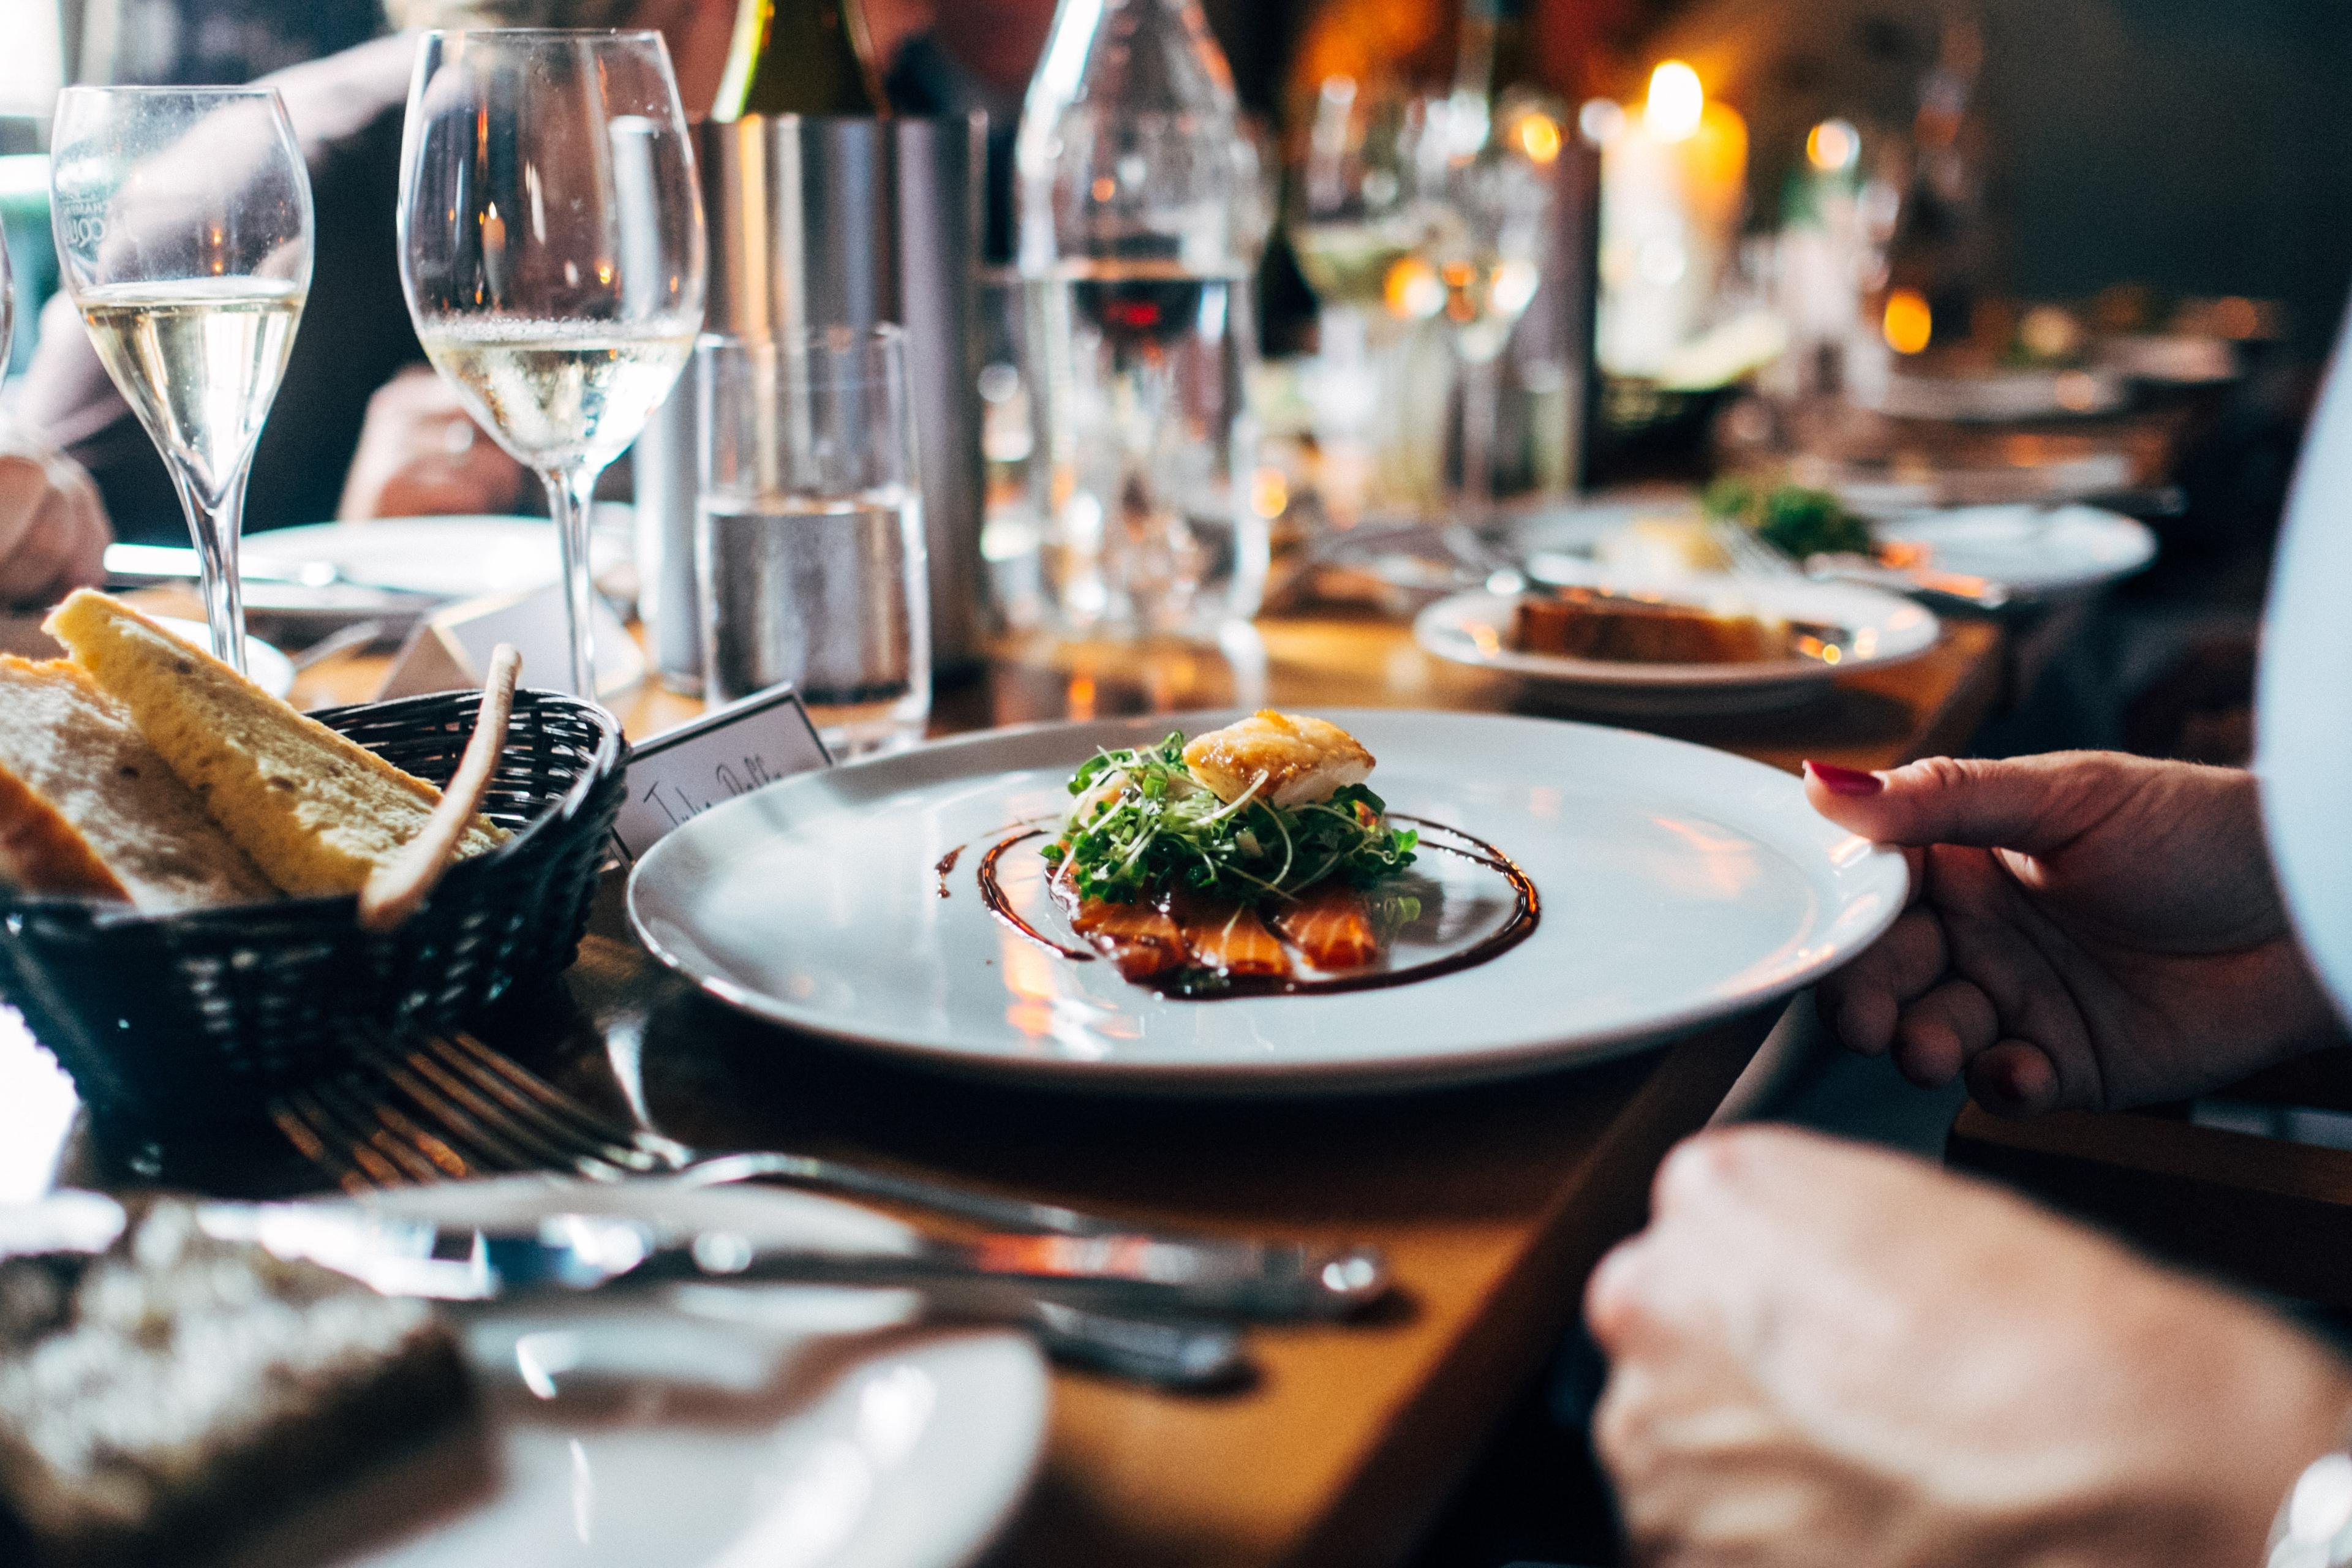 Additional per diems for catering costs 2019 - All you need to know